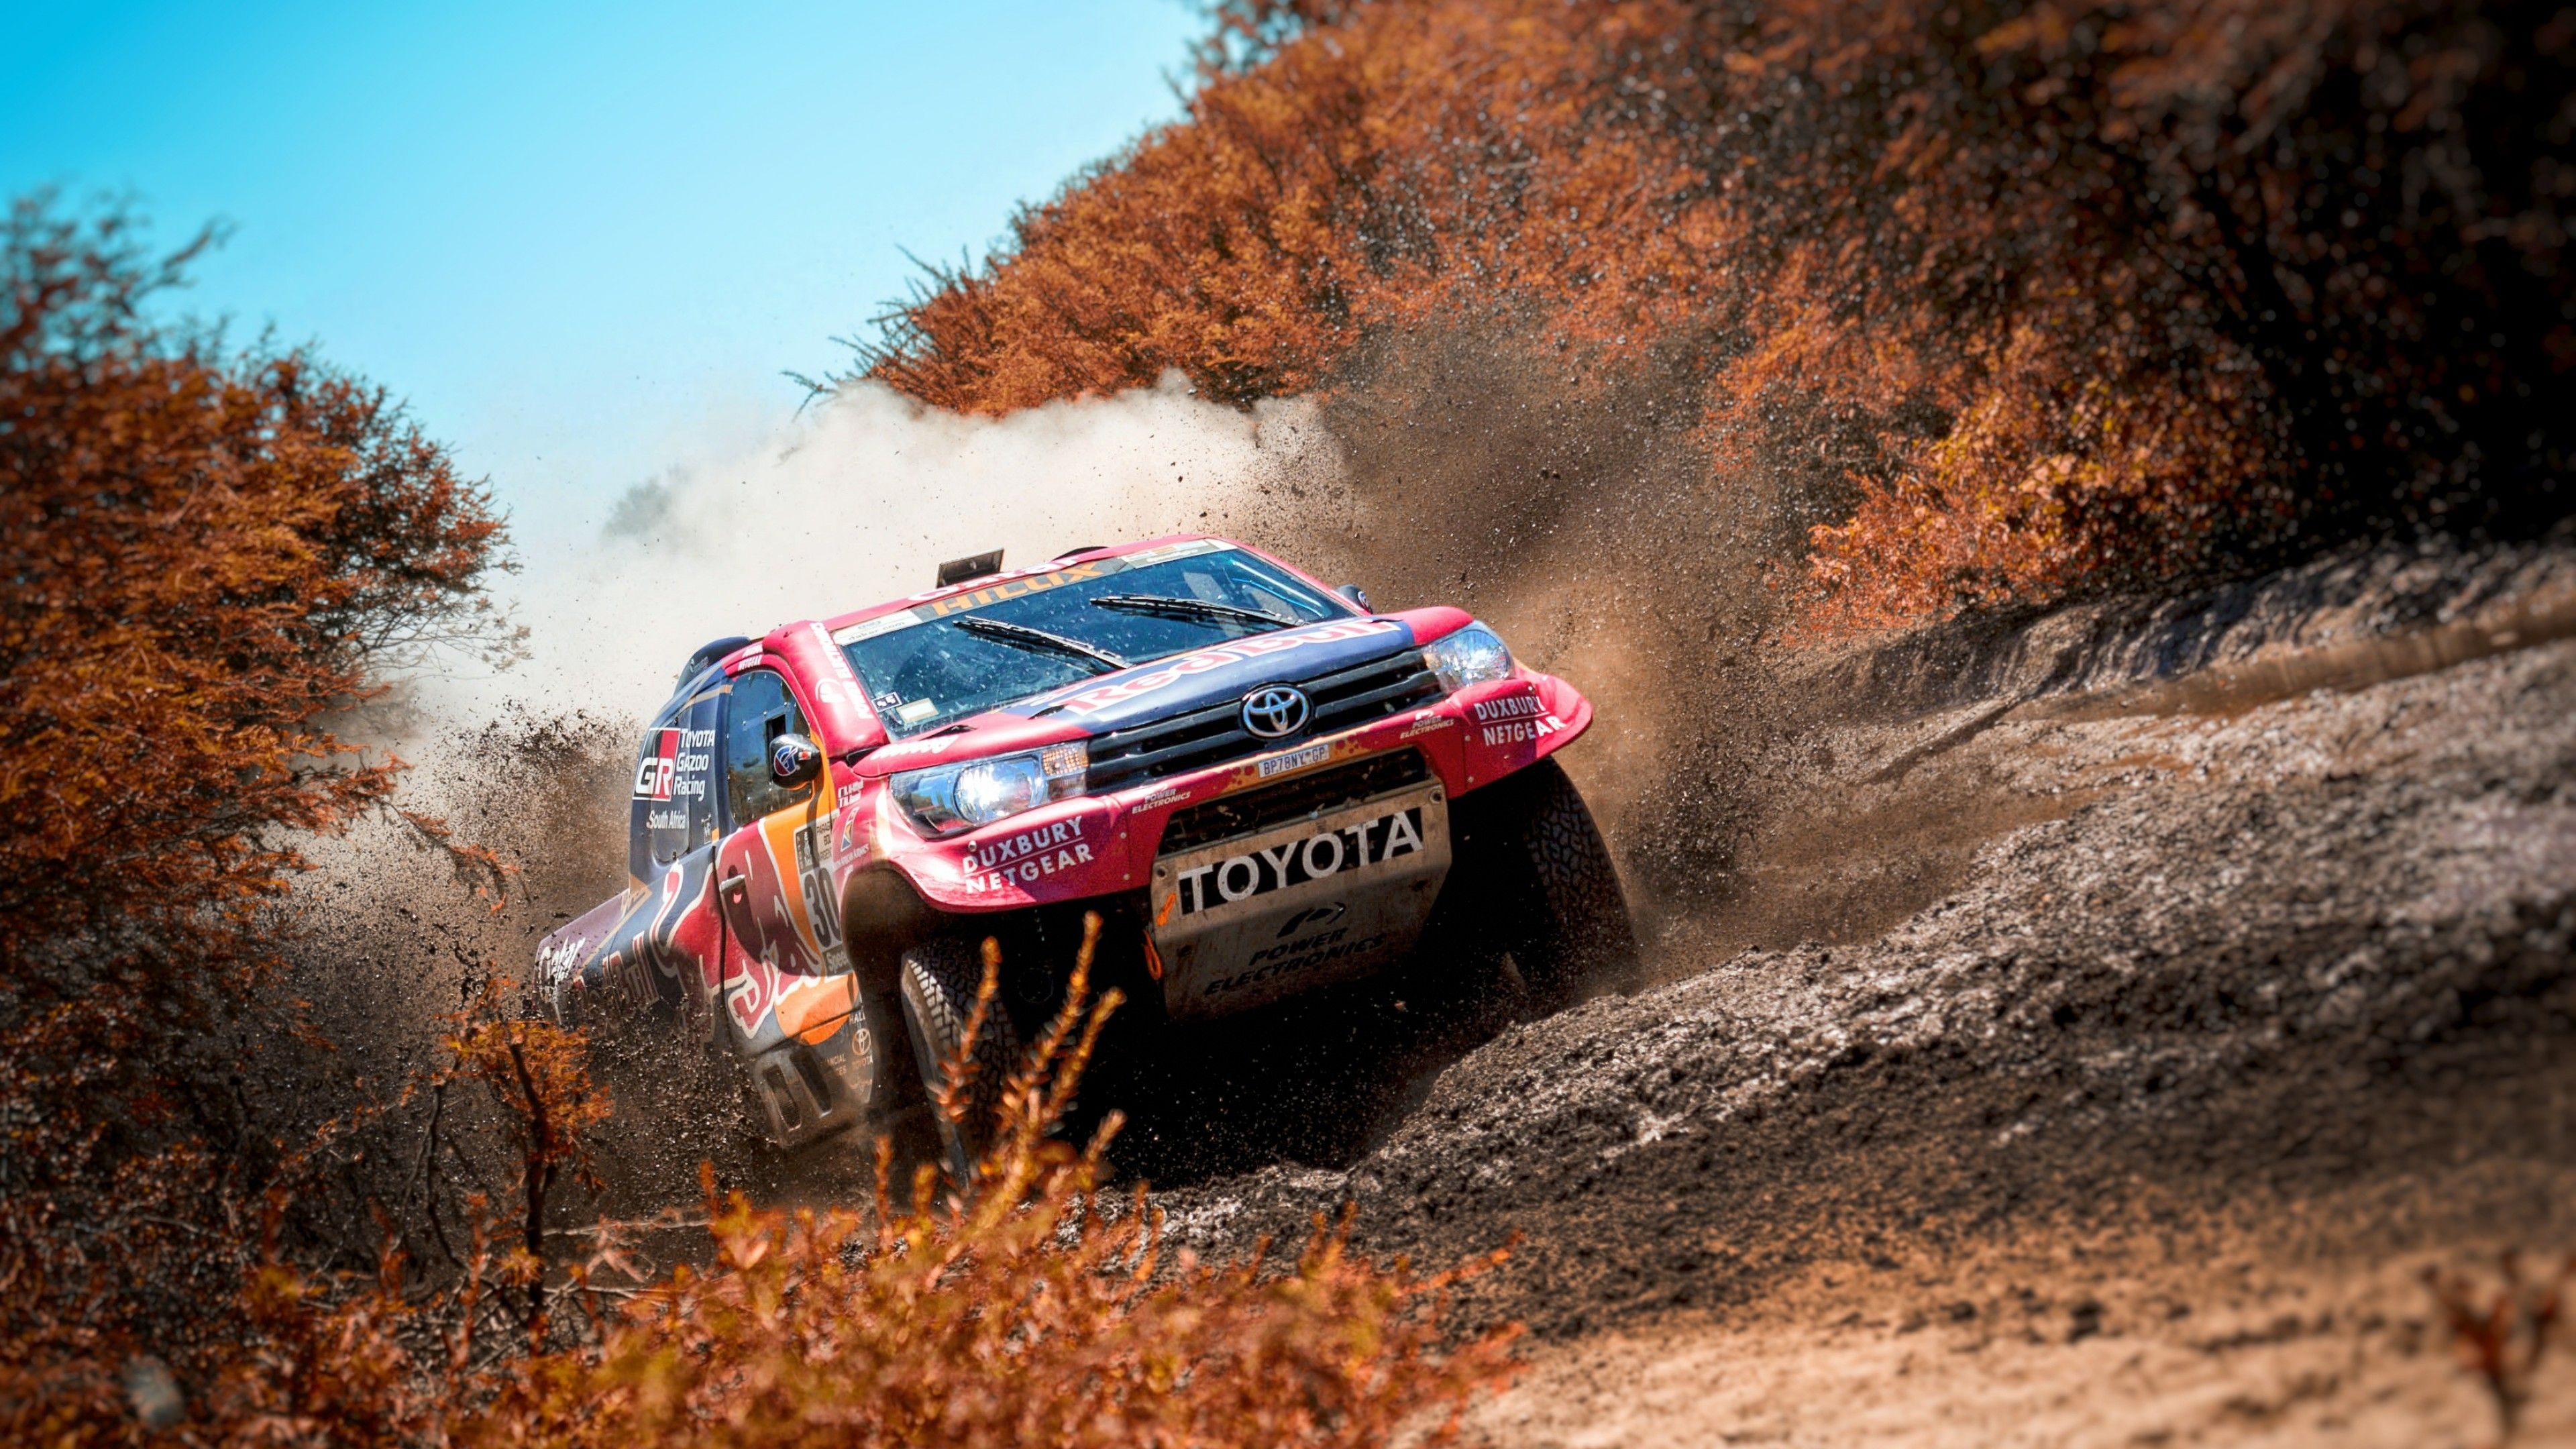 Dakar Rally: Toyota Hilux SUV car, SUVs with higher ground clearance, Off-road use. 3840x2160 4K Background.